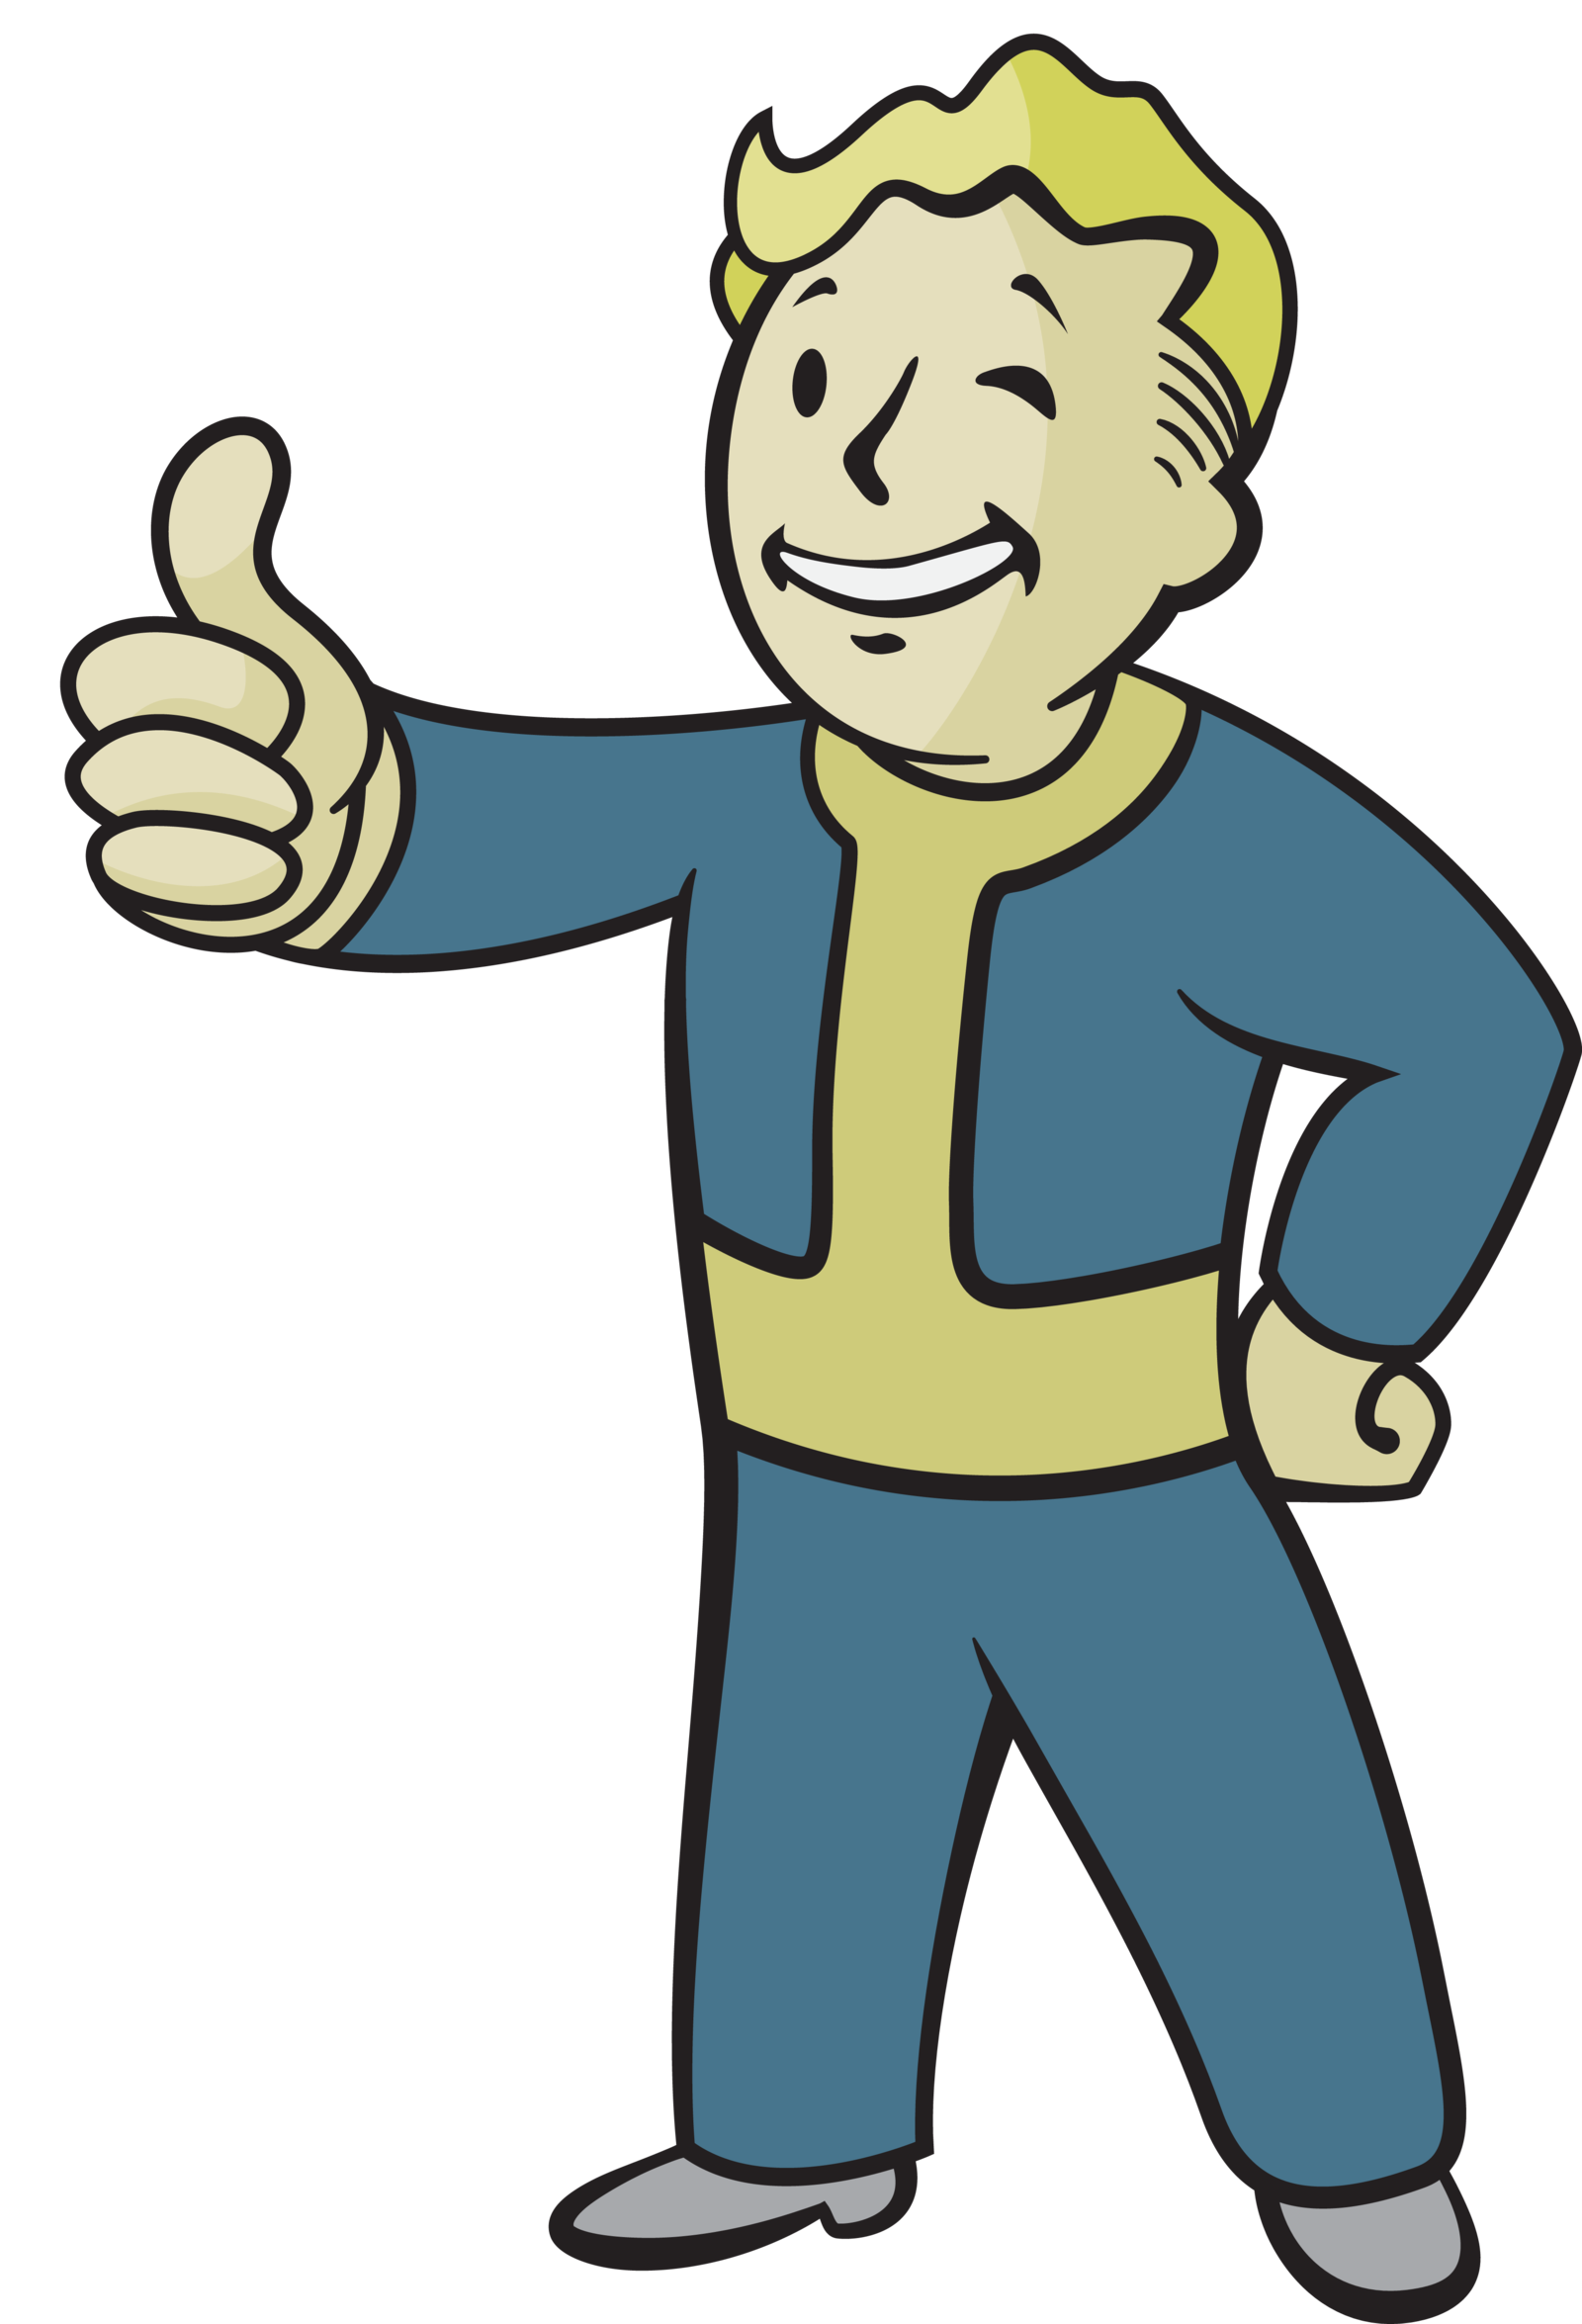 Vault Boy The Mascot For Series And Seen Regularly In Games